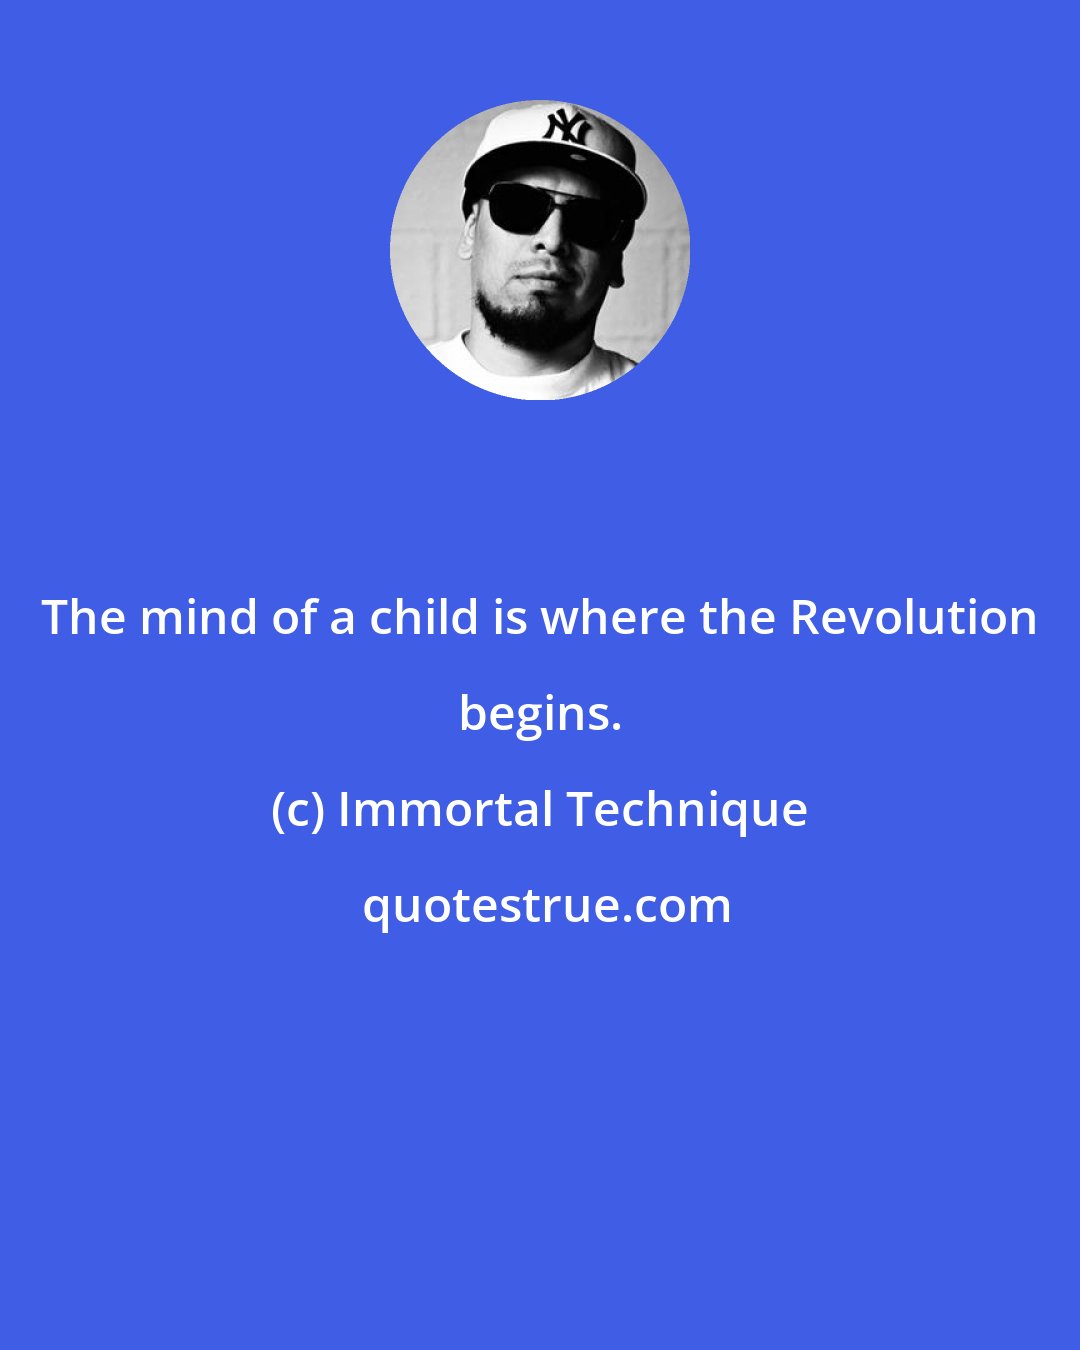 Immortal Technique: The mind of a child is where the Revolution begins.